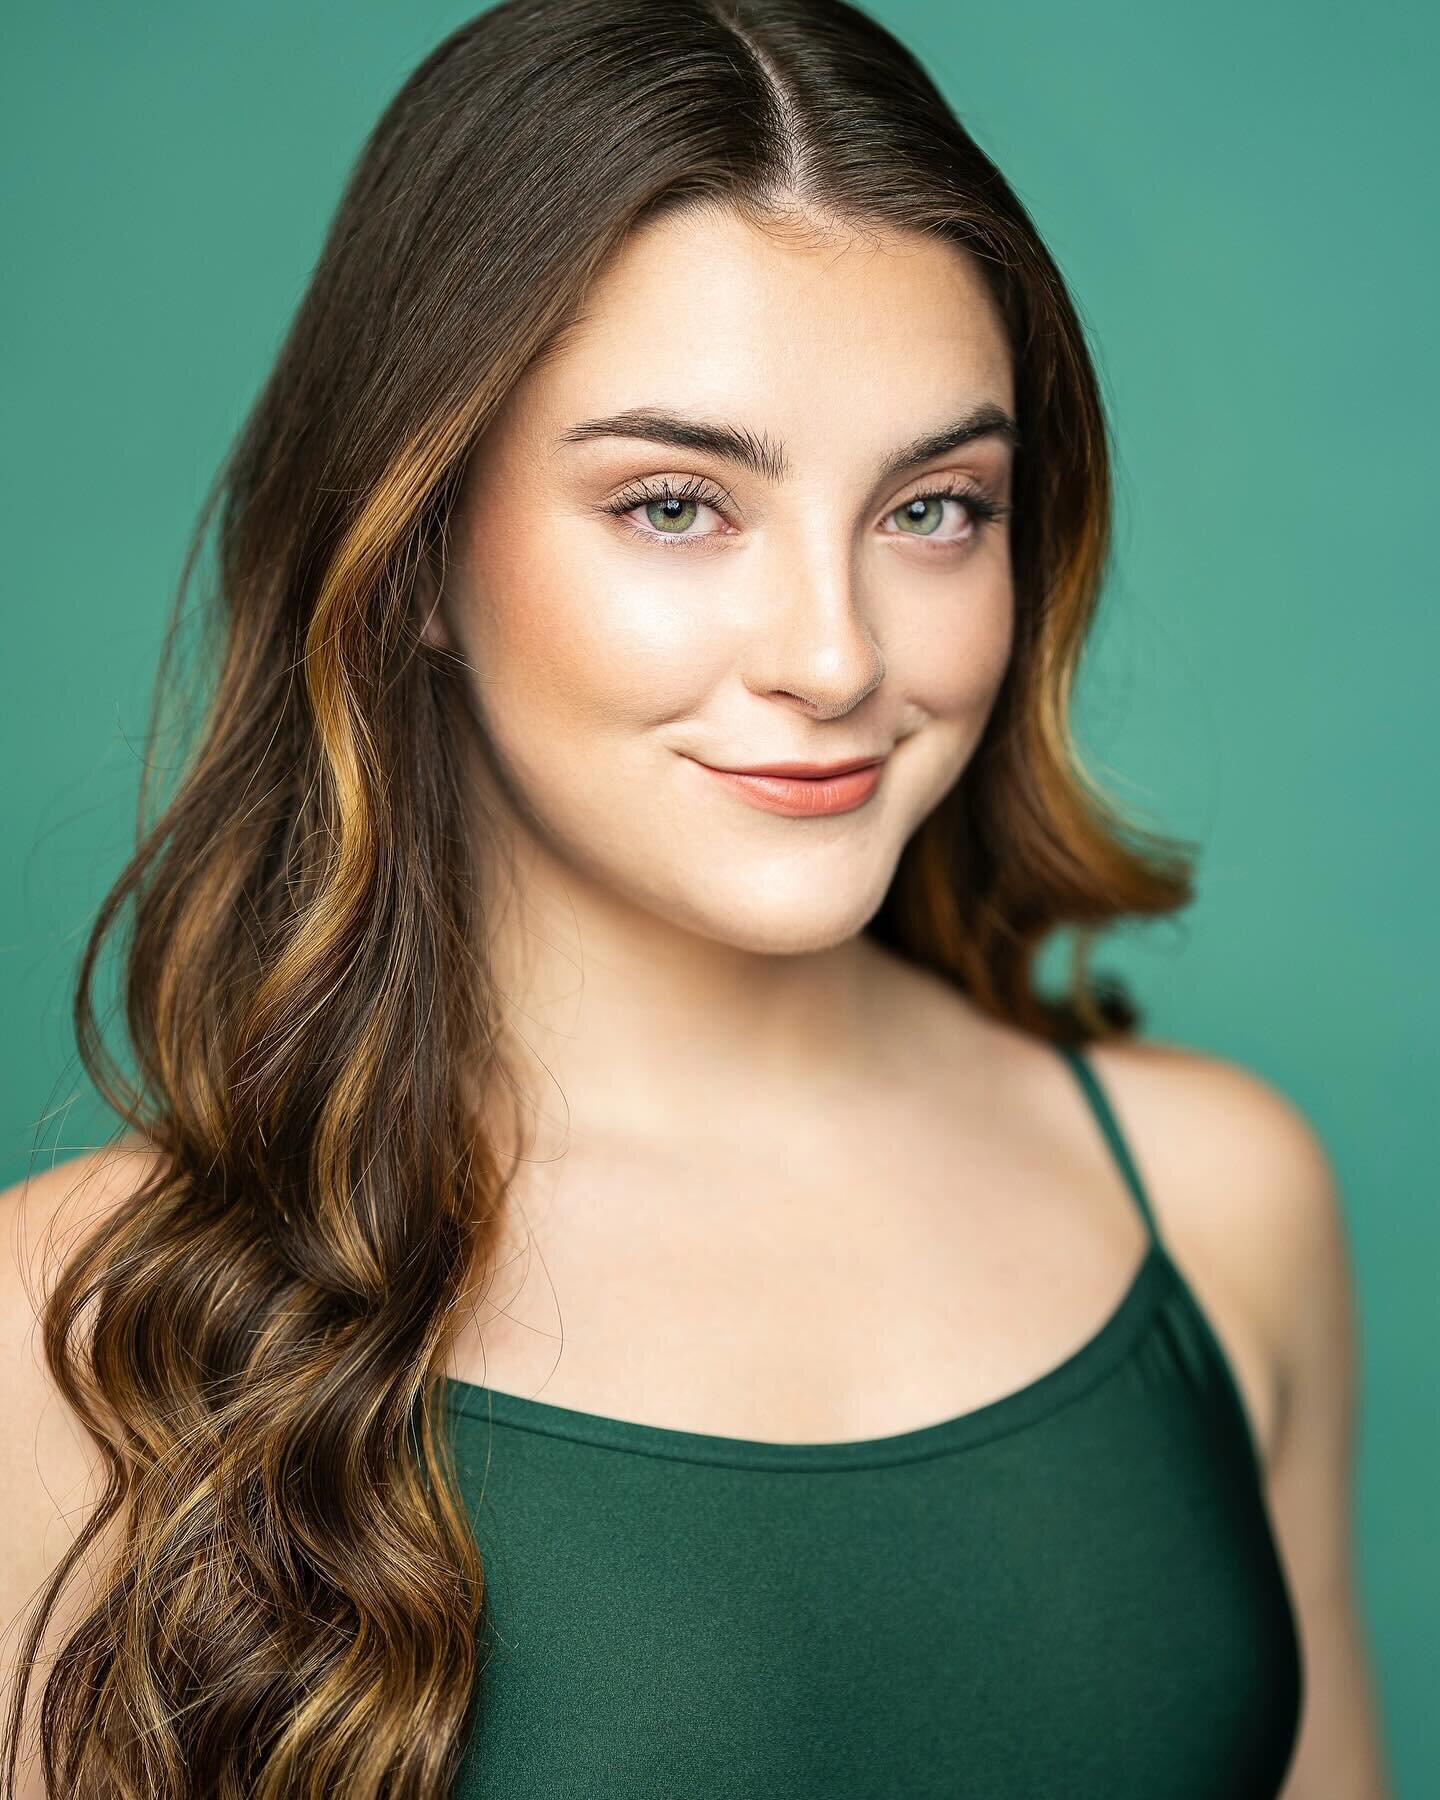 Introducing our newest member of PMT Dance Company, Sydney Mora!

✨Sydney is originally from West Texas
✨Her favorite music artist is Sammy Rae &amp; The Friends
✨She recently finished a contract as a singer/ dancer at Hersheypark!
✨Sydney is a fitne